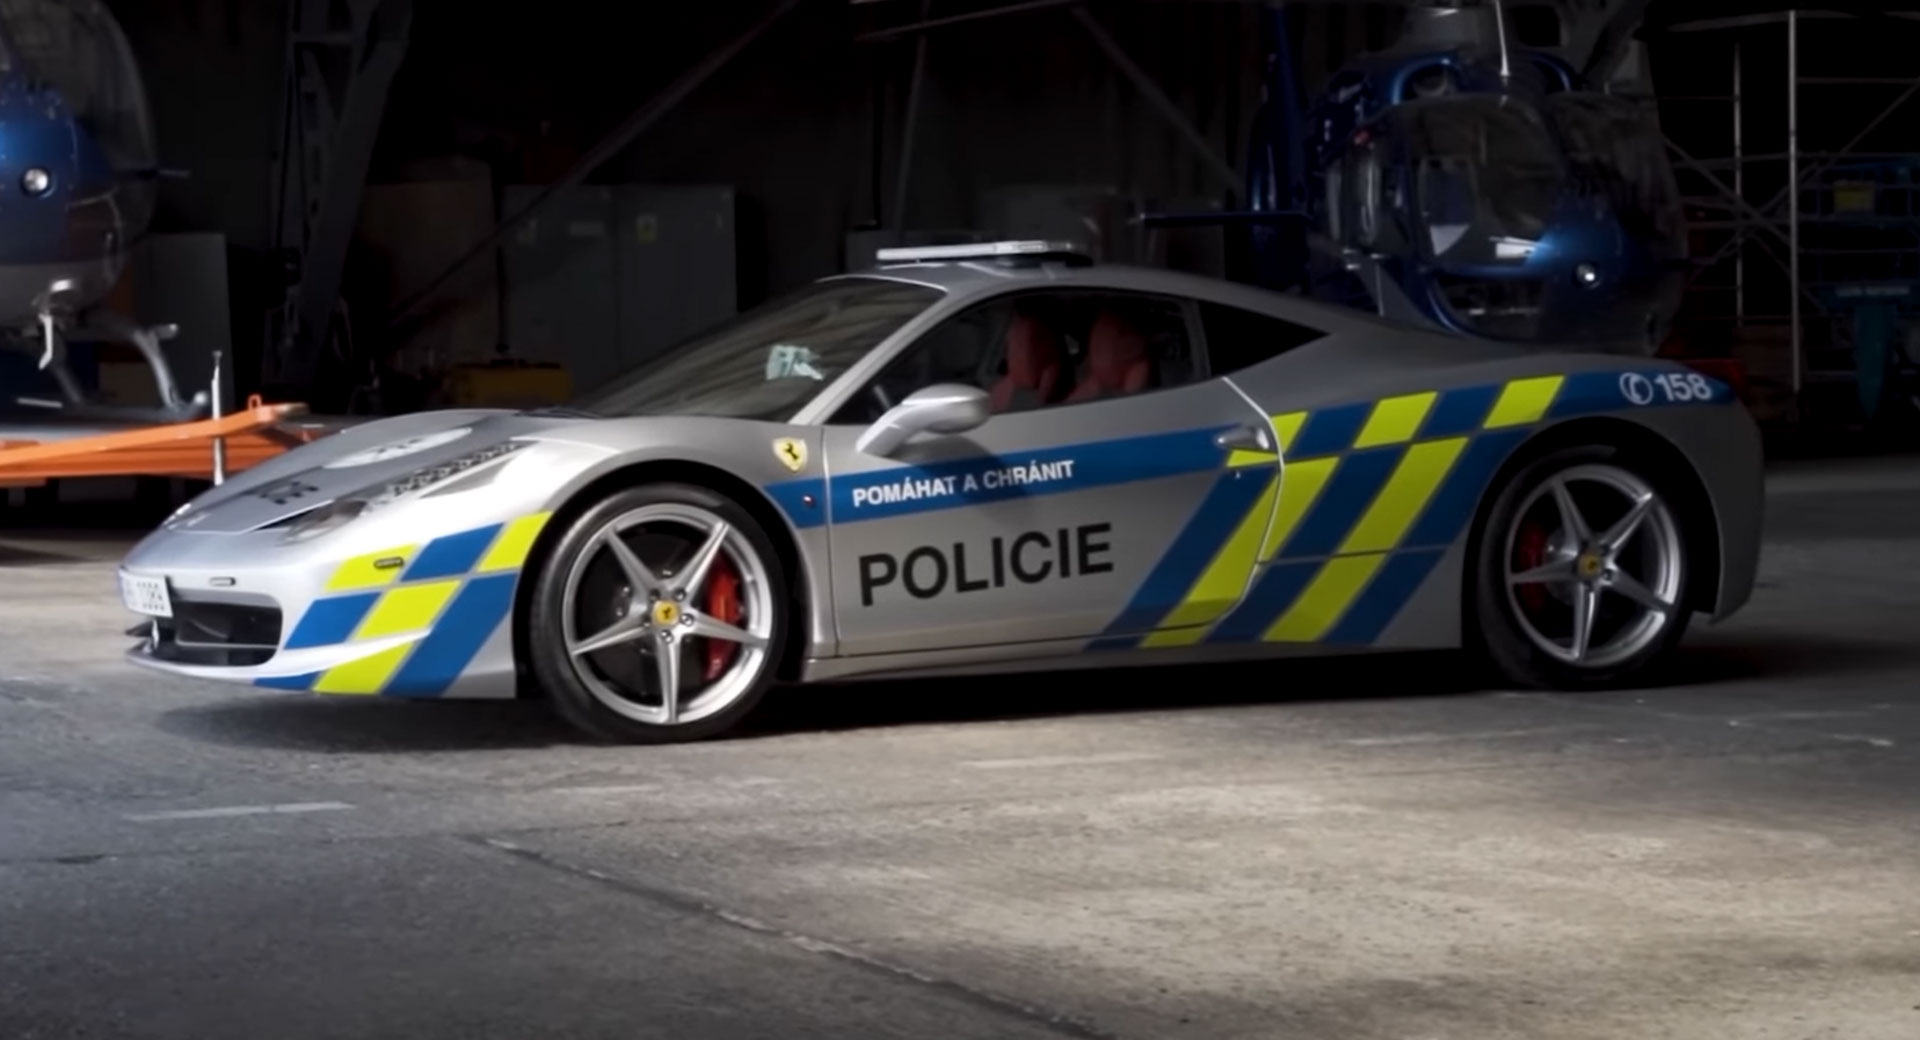 Czech Police Are Patrolling The Streets In A Ferrari Italia That They Seized